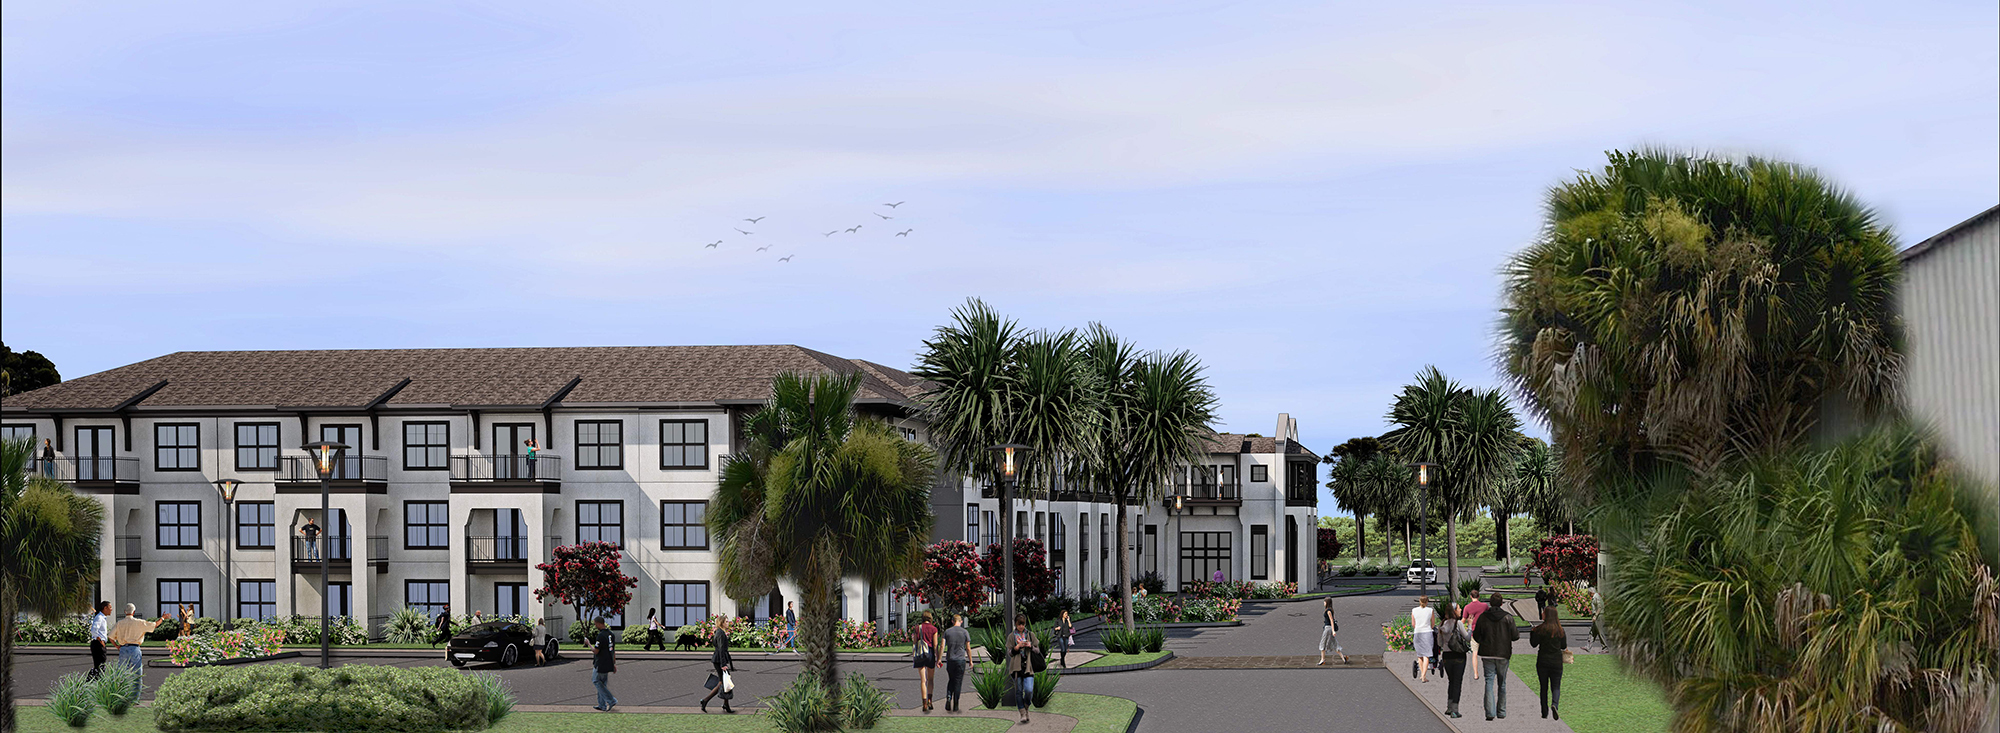 Plans for 500 Atlantic development in Neptune Beach include apartments and retail.